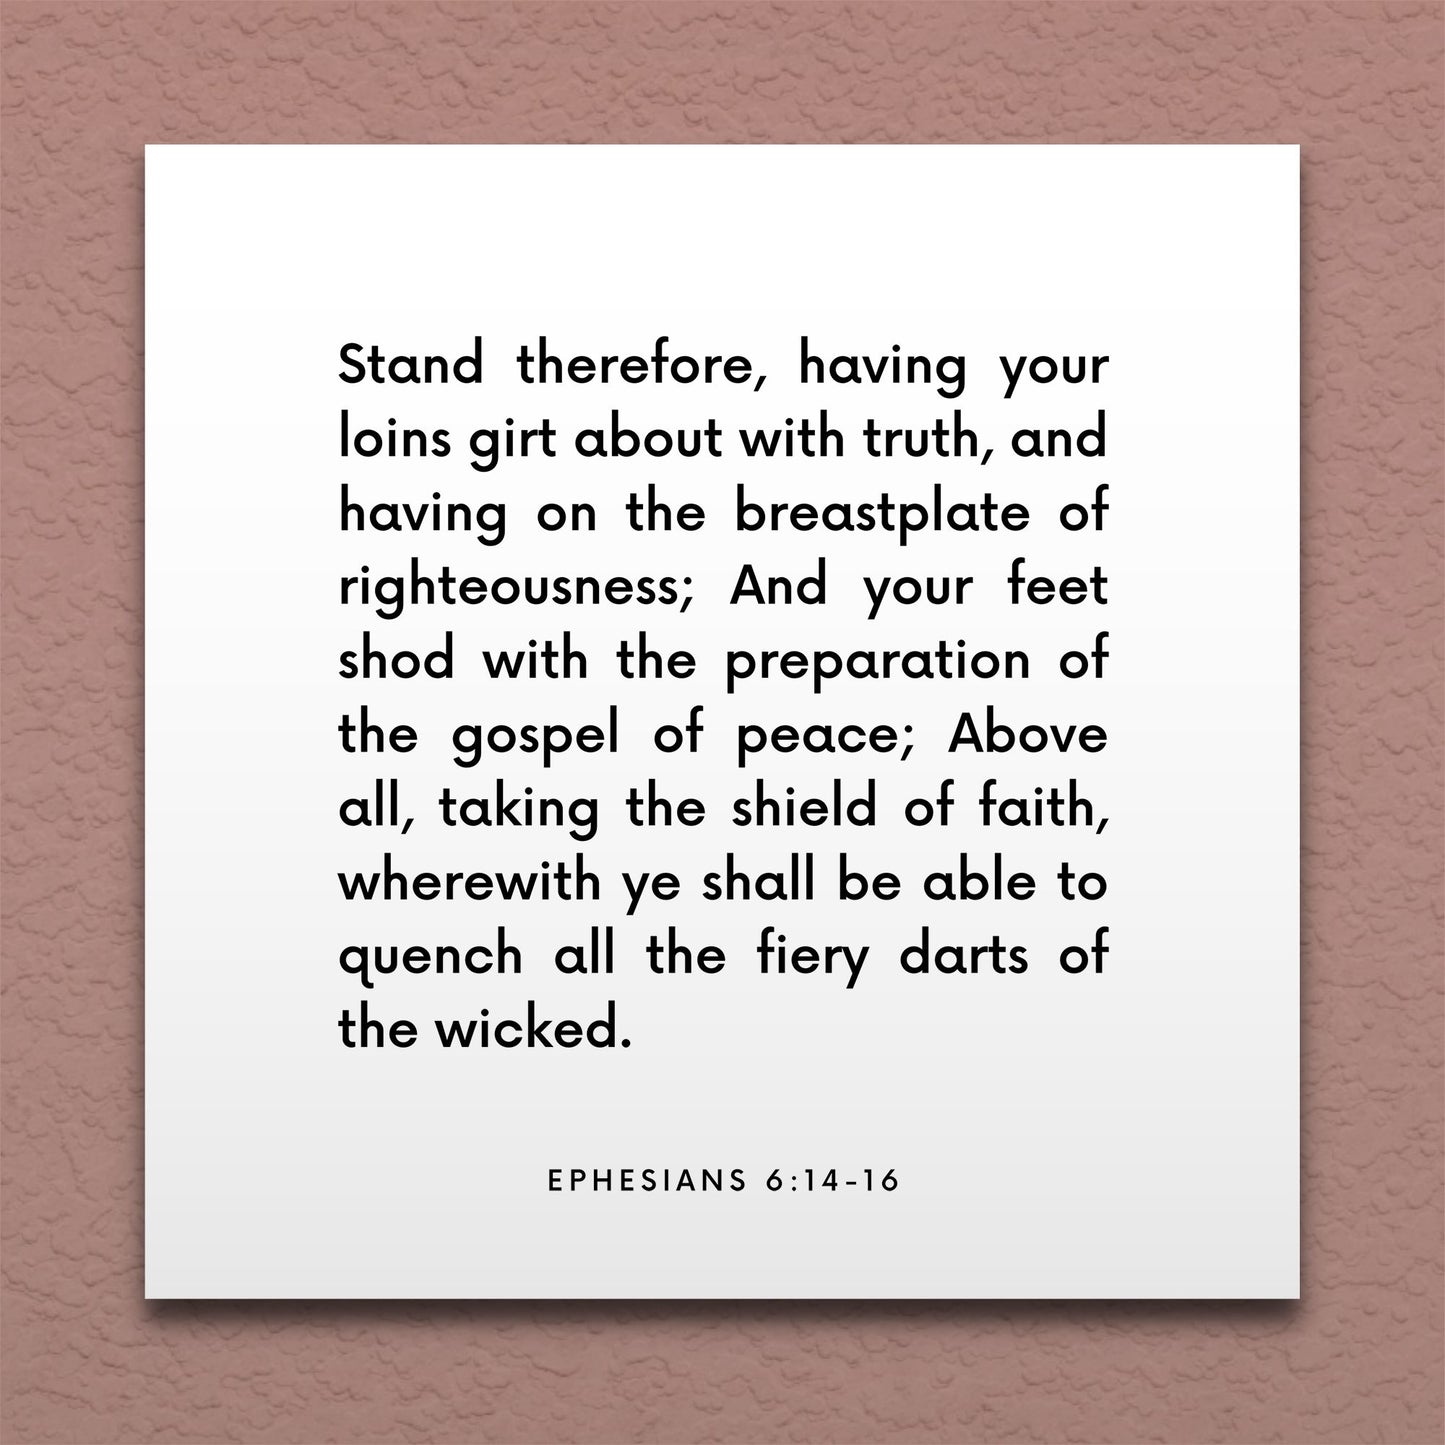 Wall-mounted scripture tile for Ephesians 6:14-16 - "Stand therefore, having your loins girt about with truth"